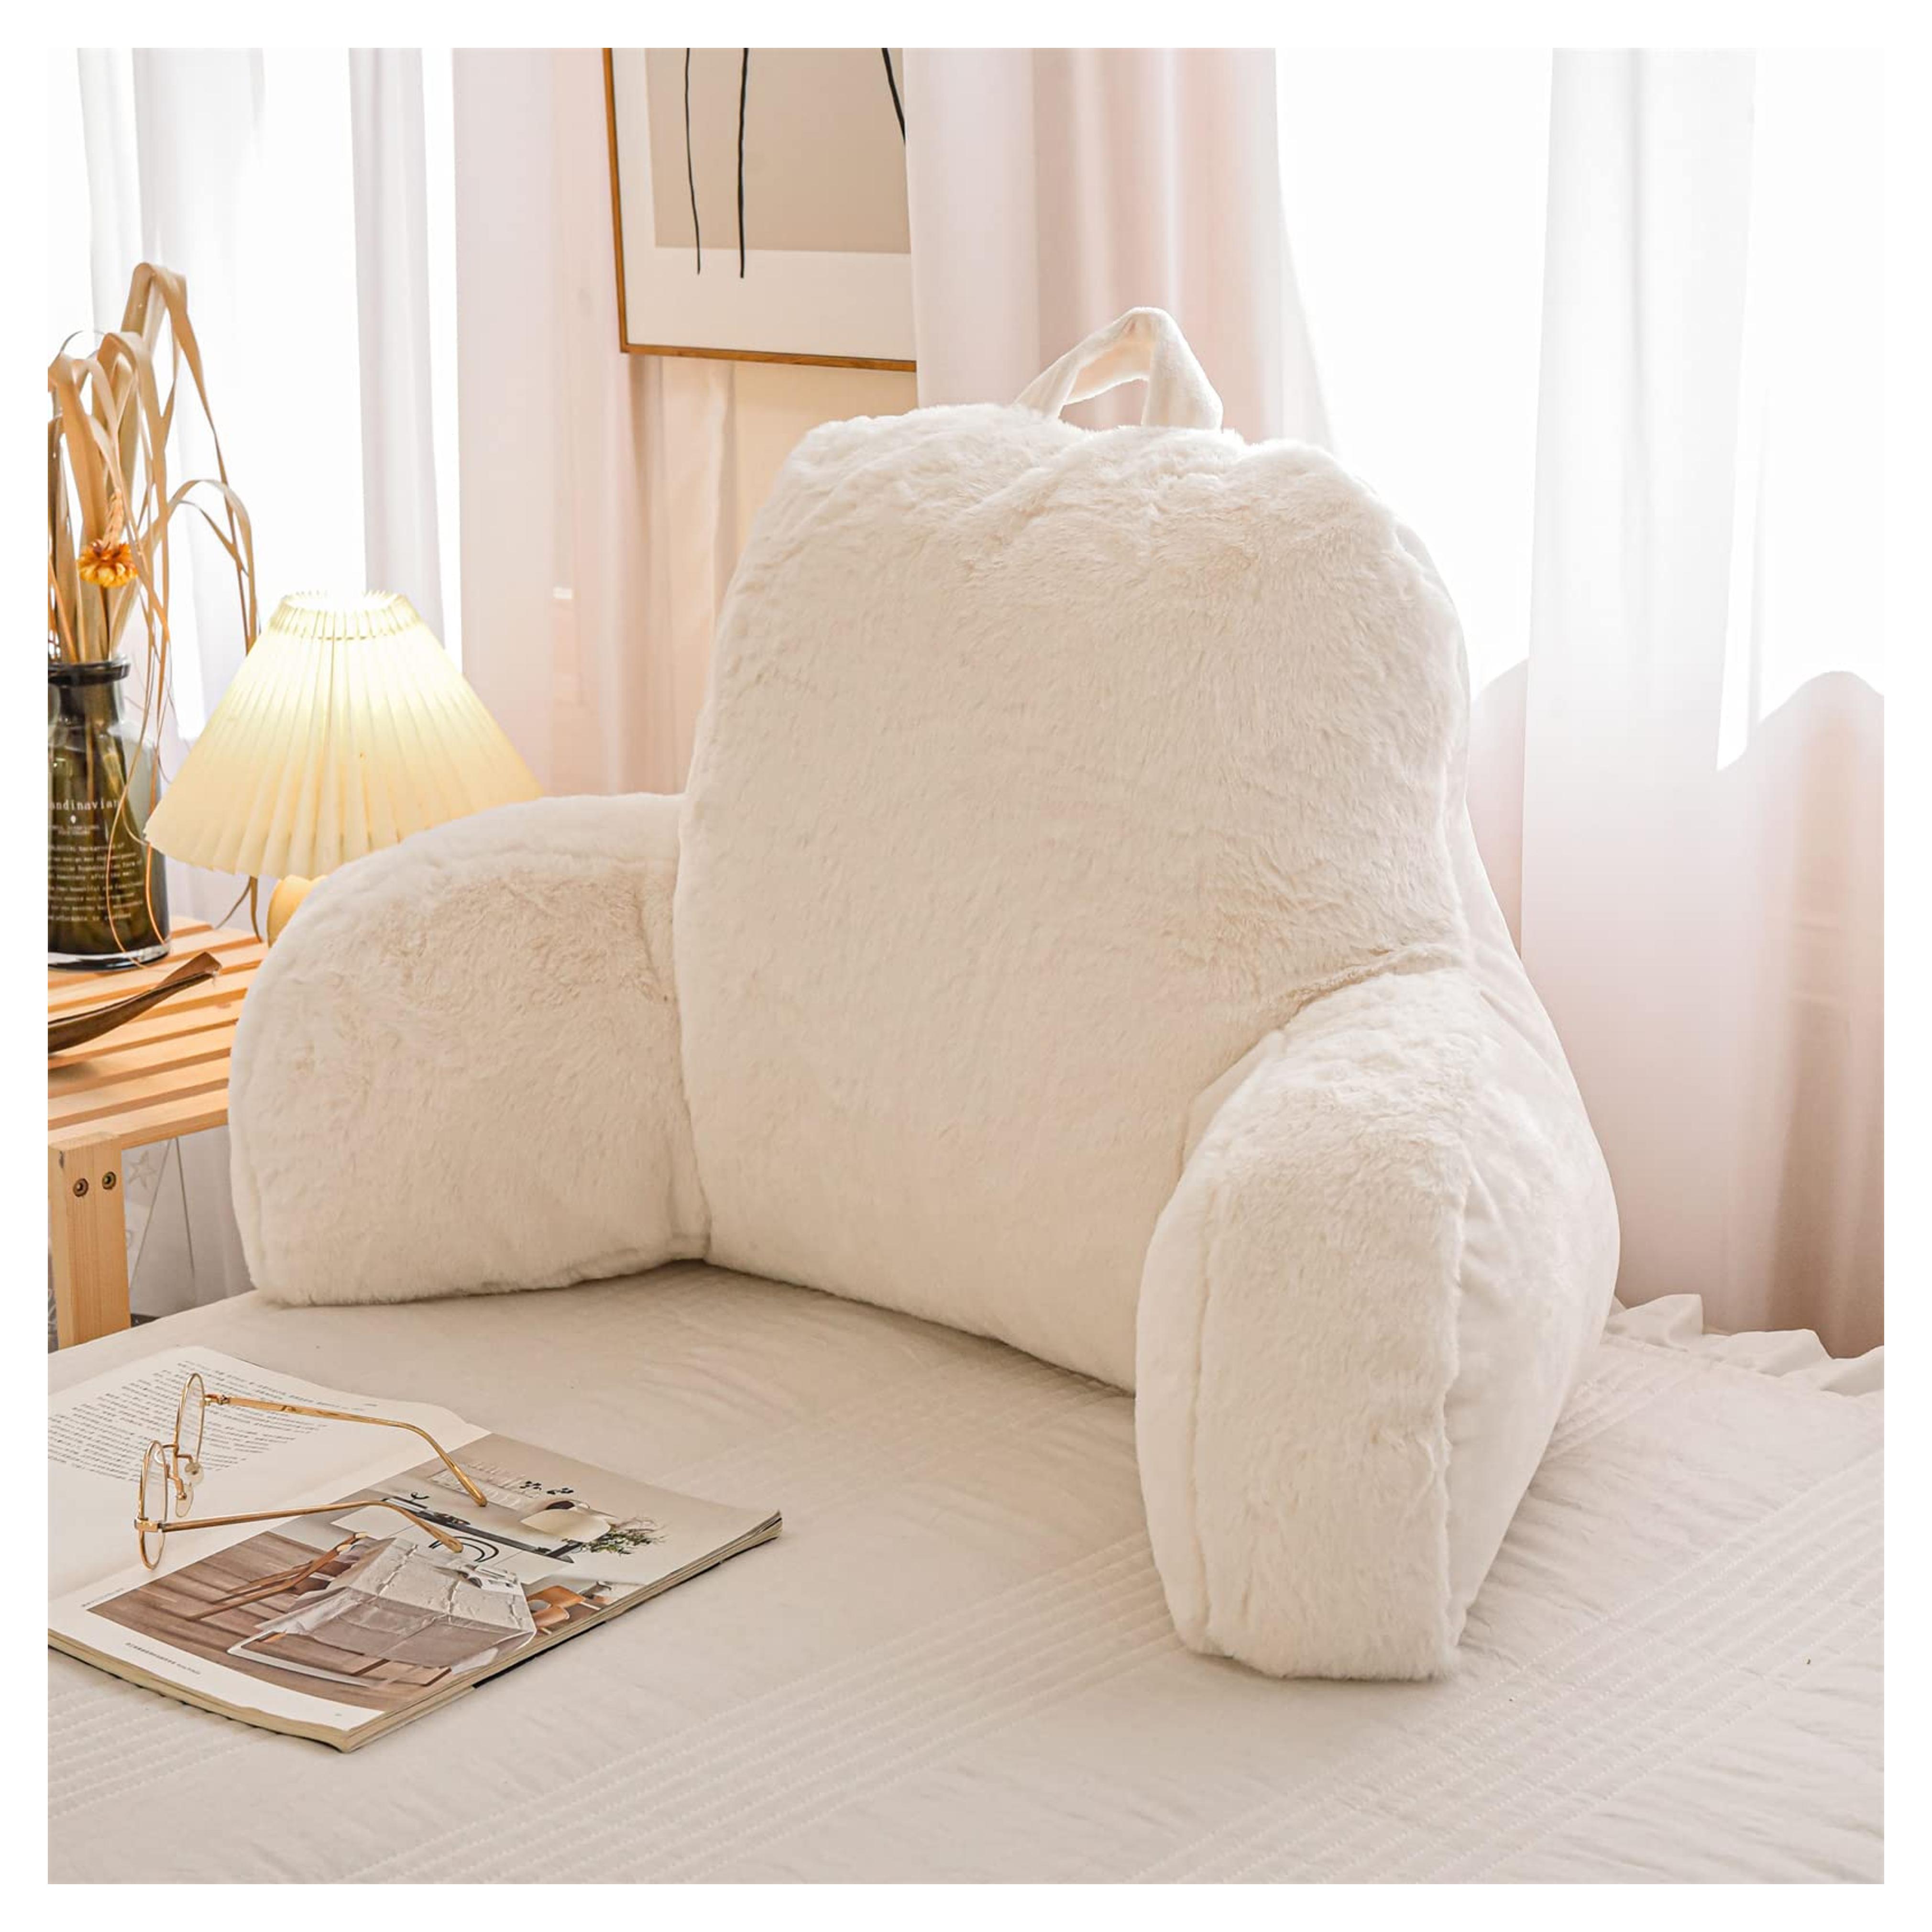 Amazon.com: A Nice Night Faux Fur Reading Pillow Bed Wedge Large Adult Children Backrest with Arms Back Support for Sitting Up in Bed/Couch for Bedrest,Ivory : Home & Kitchen